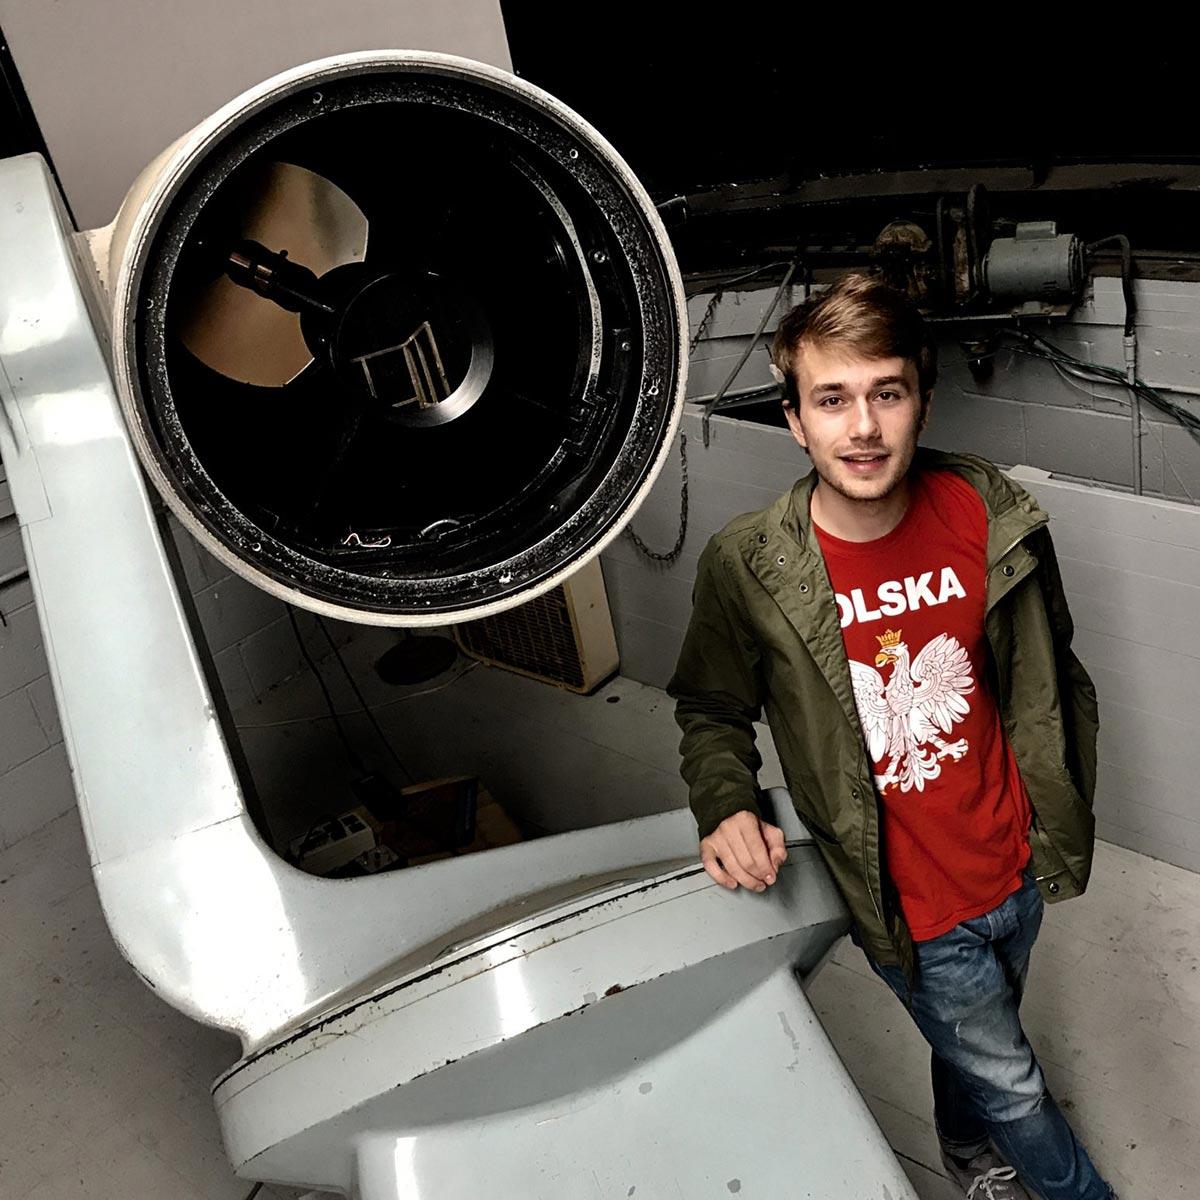 Jacob Pilawa ’20 with the telescope at Colgate's Foggy Bottom Observatory